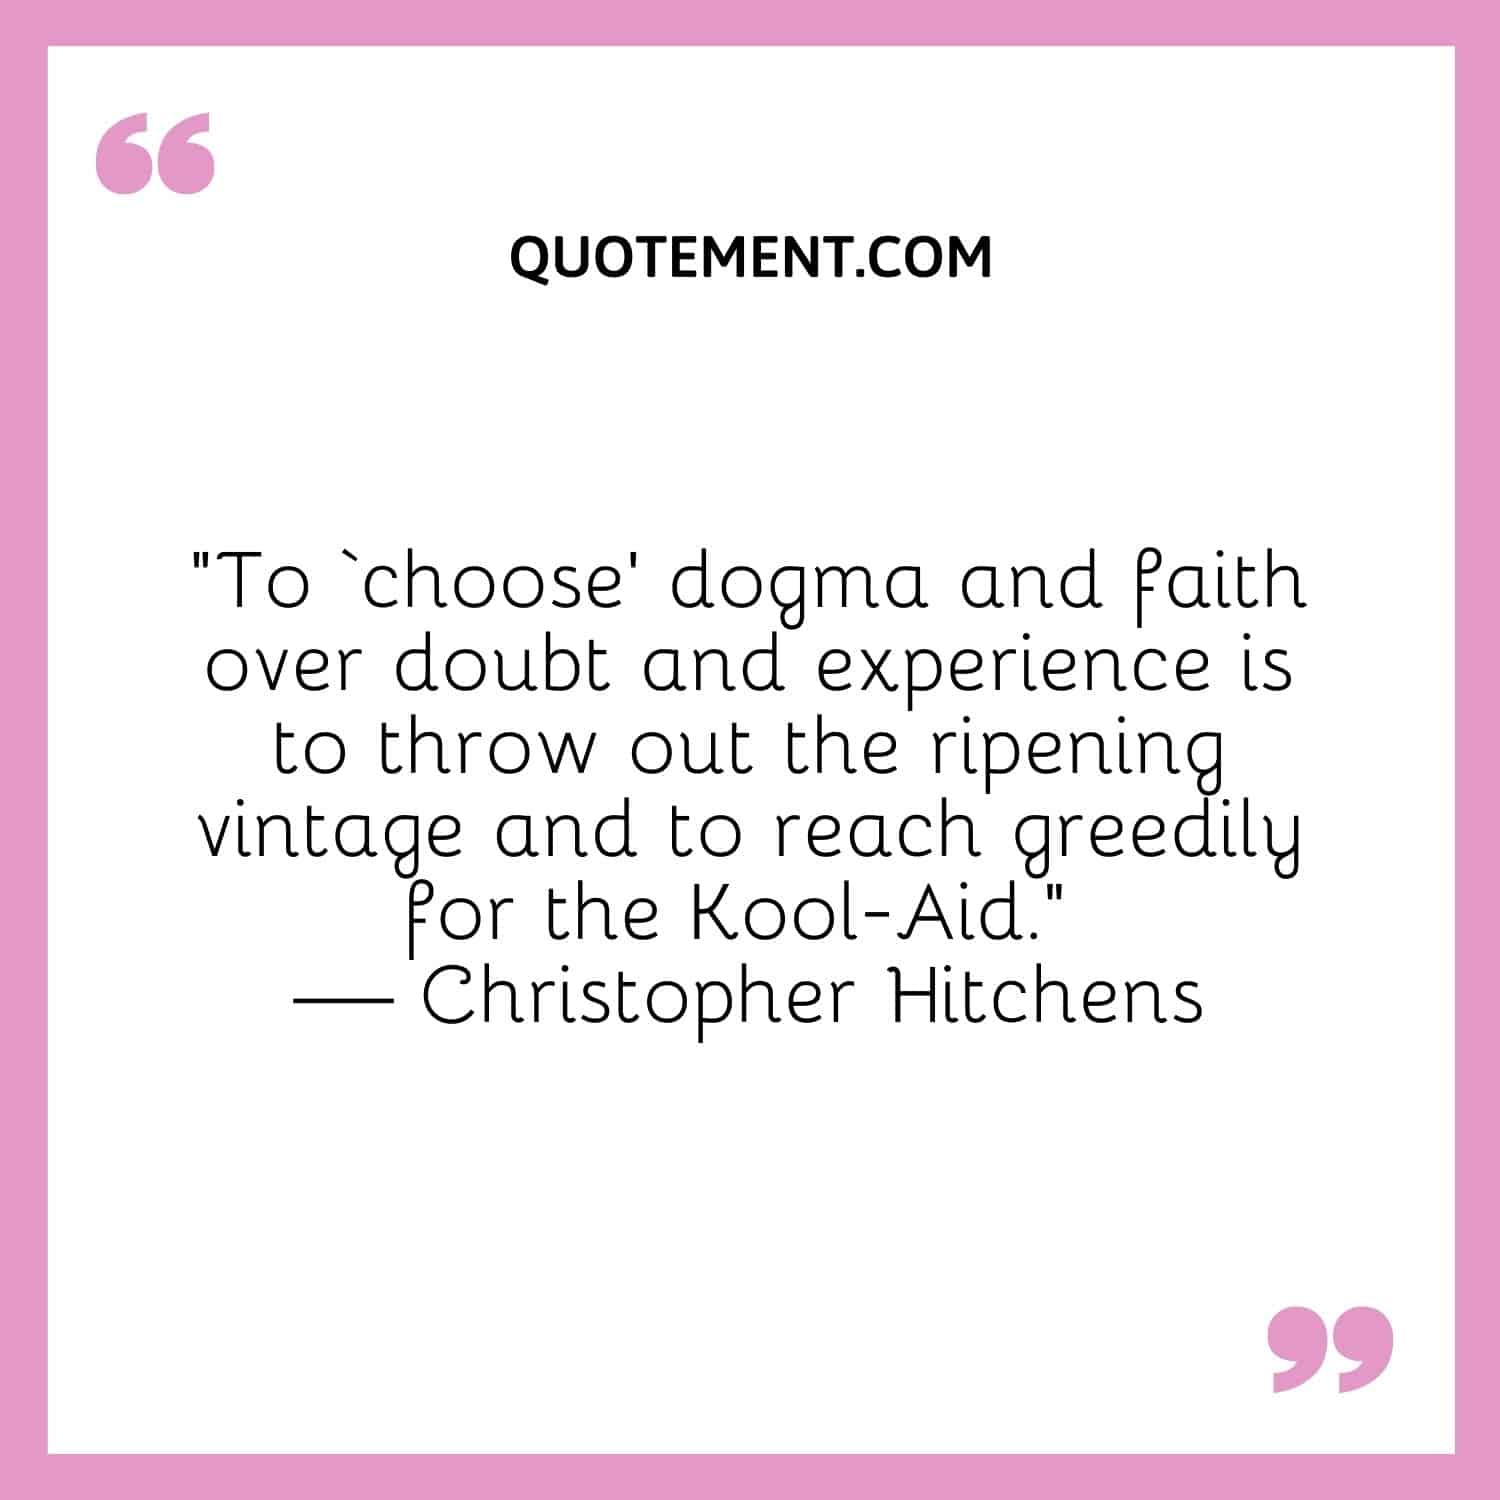 To ‘choose’ dogma and faith over doubt and experience is to throw out the ripening vintage and to reach greedily for the Kool-Aid